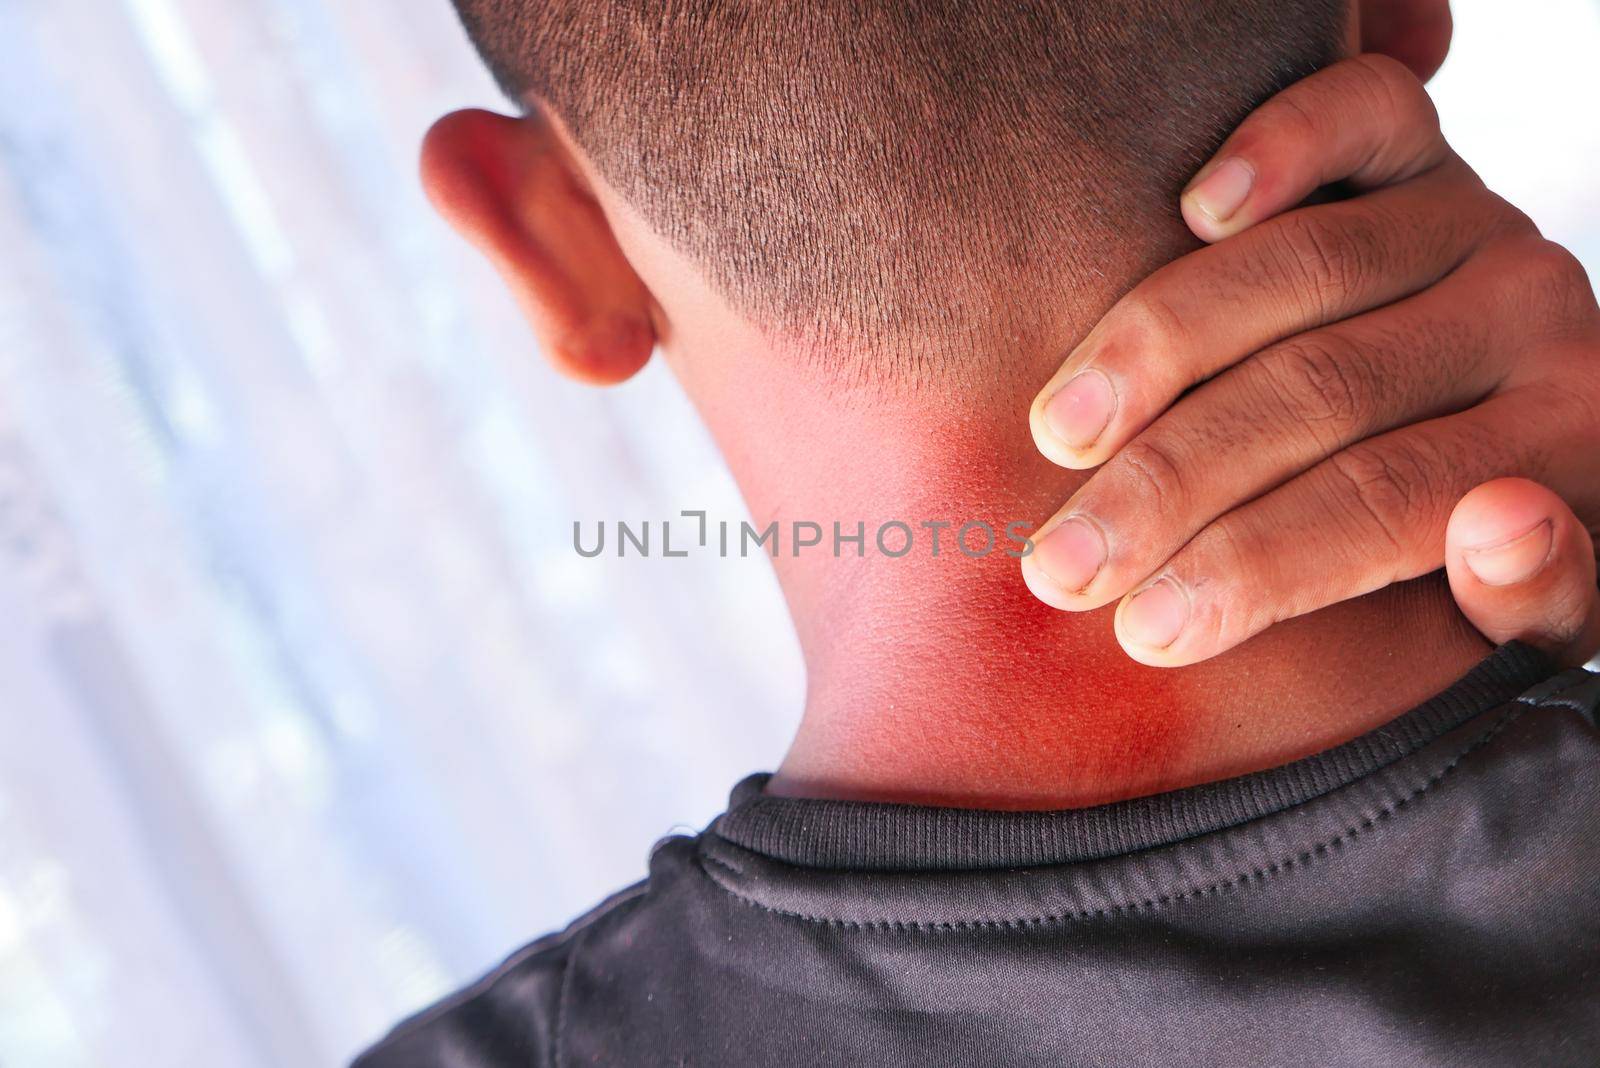 man suffering from neck or shoulder pain at home